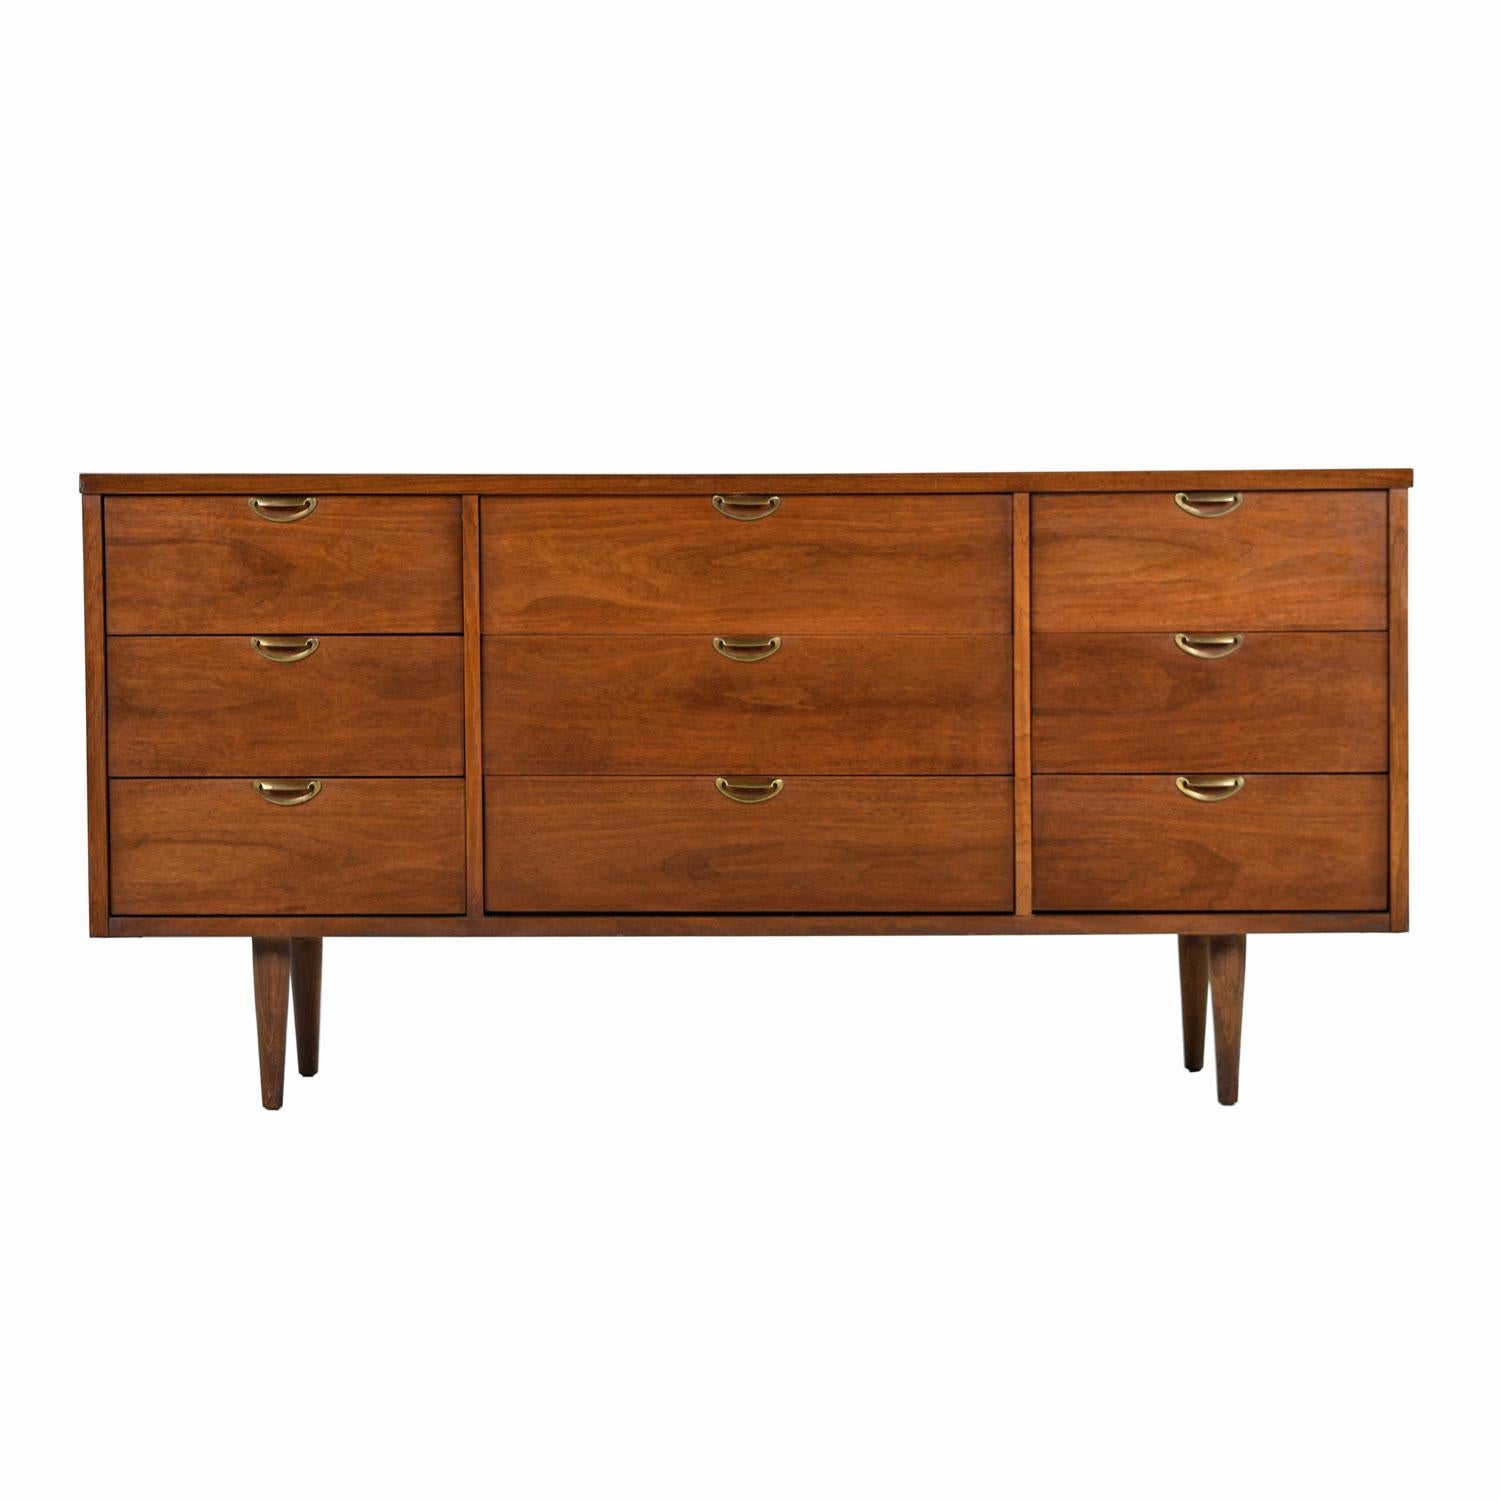 Mid-Century Modern American made 9-drawer dresser or credenza with brass accents. Made by Bassett, circa 1960s. This stunning triple dresser features sculpted, scalloped shaped brass pulls on the drawers that perfectly contrast and compliment the